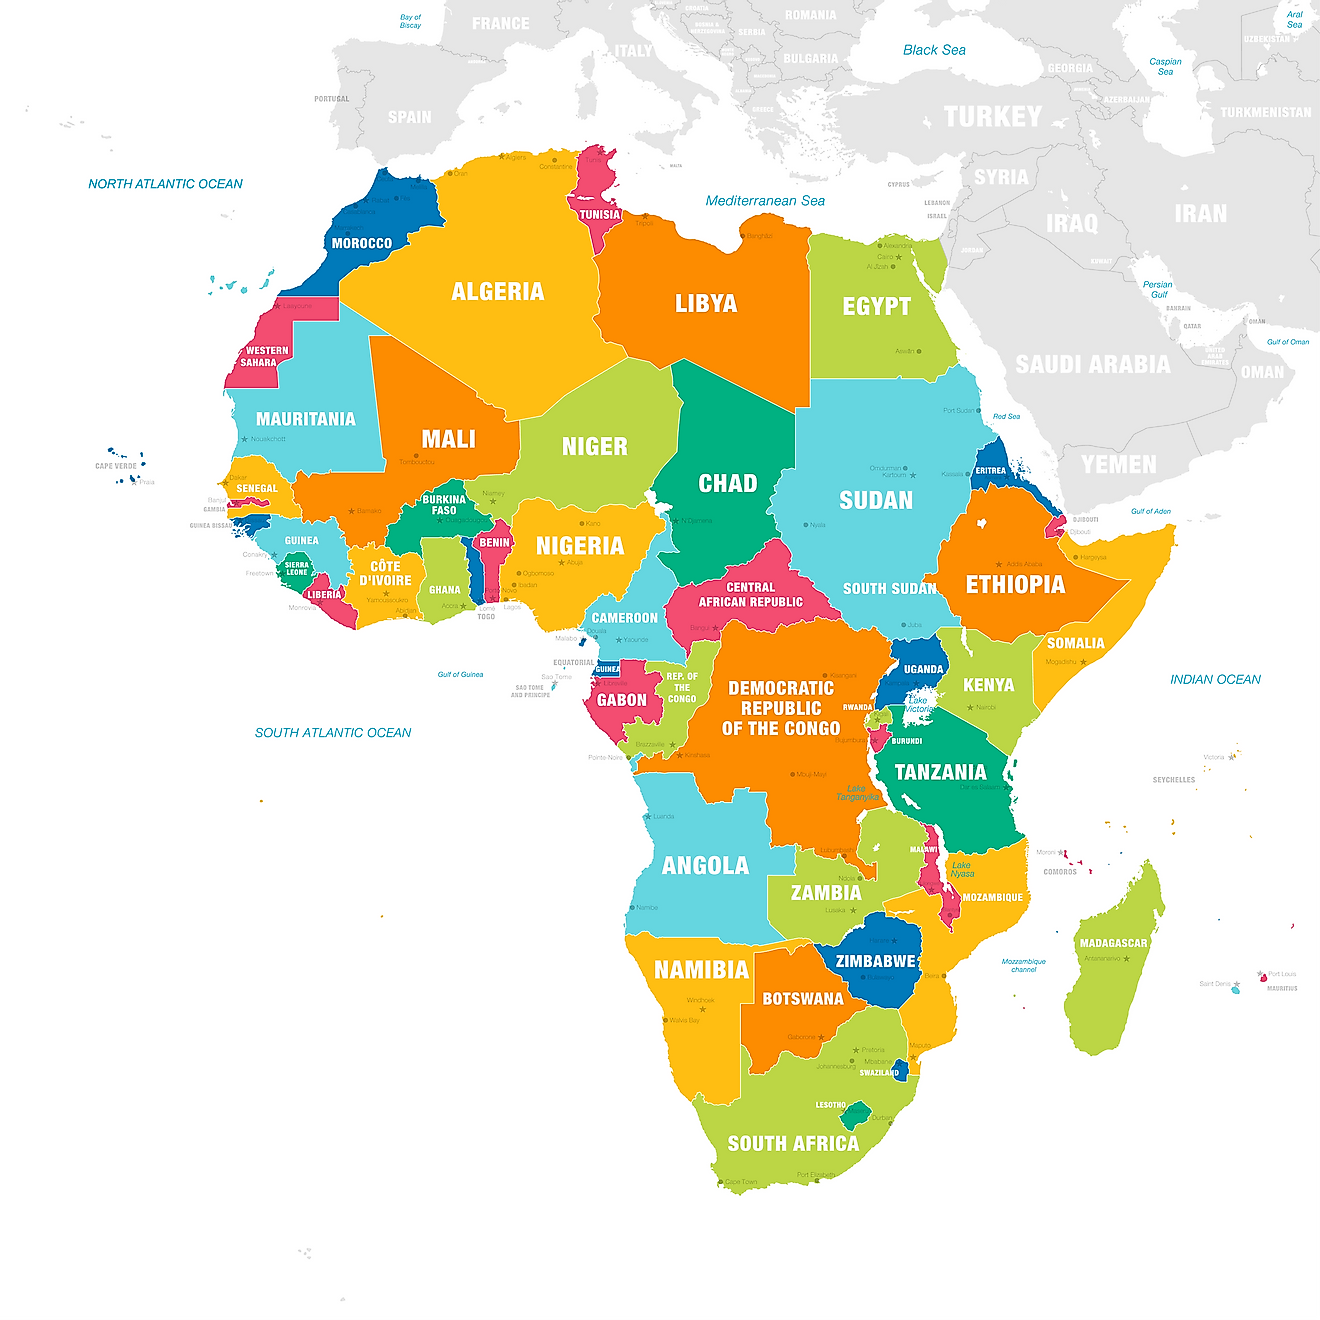 How Many Countries Are There In Africa? - WorldAtlas